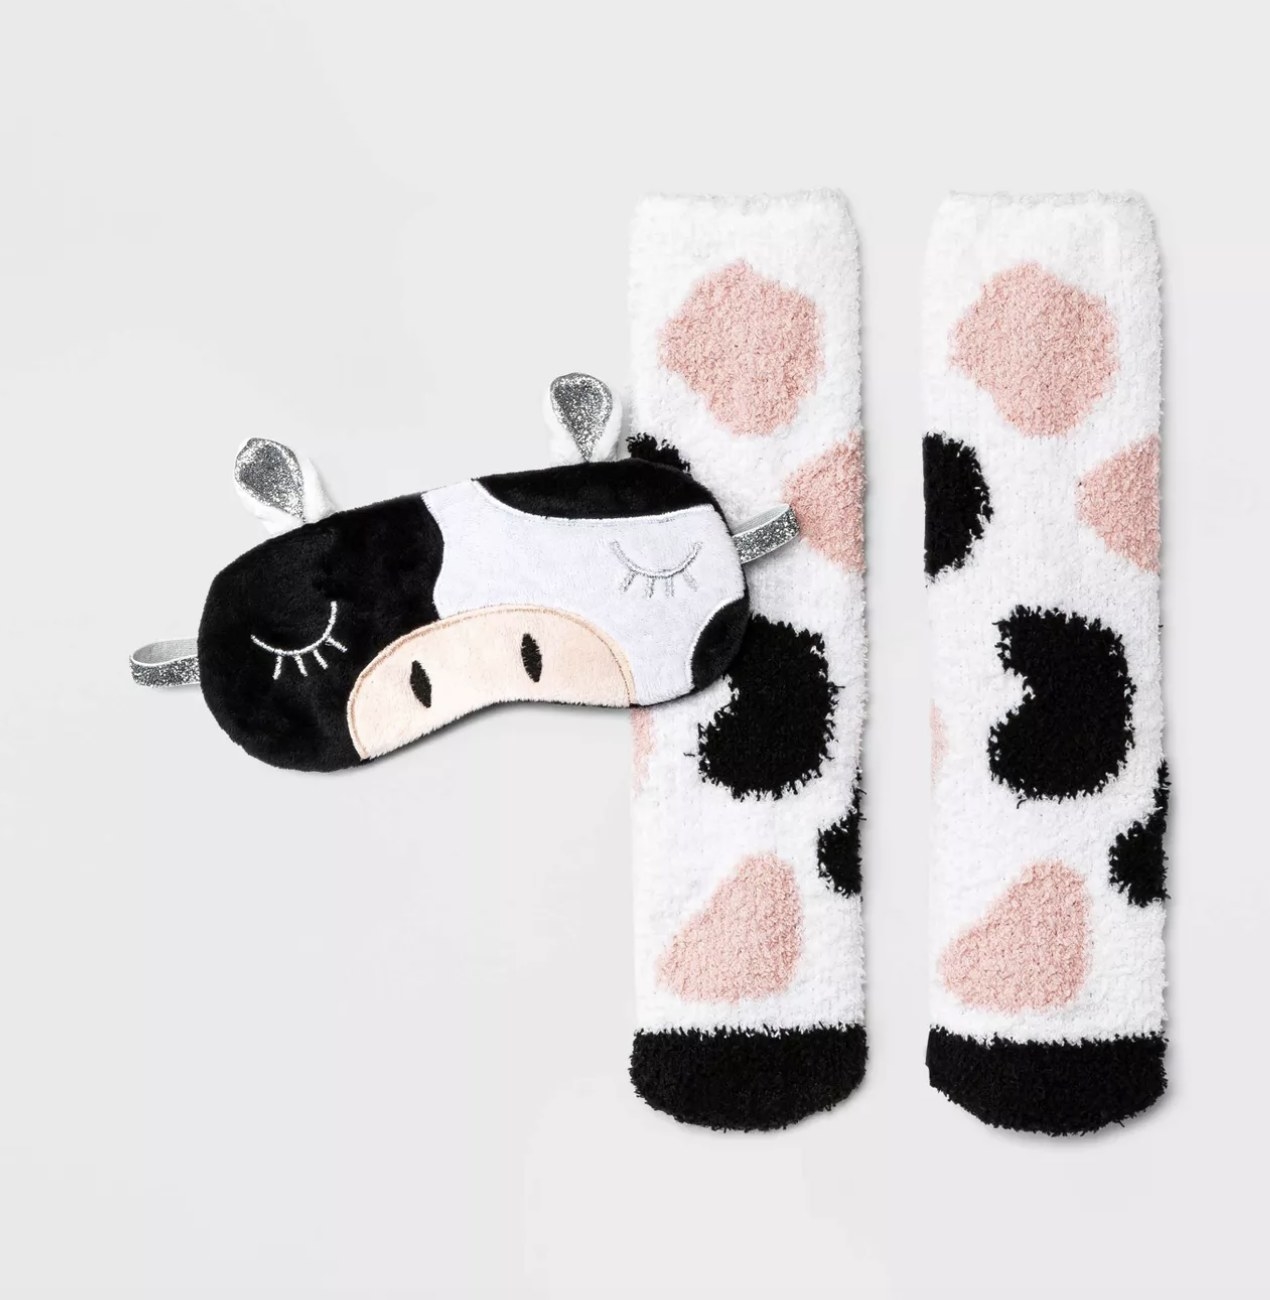 The cow mask has a sleepy face with pink, white, black and silver detailing and the socks have pink and black cow spots